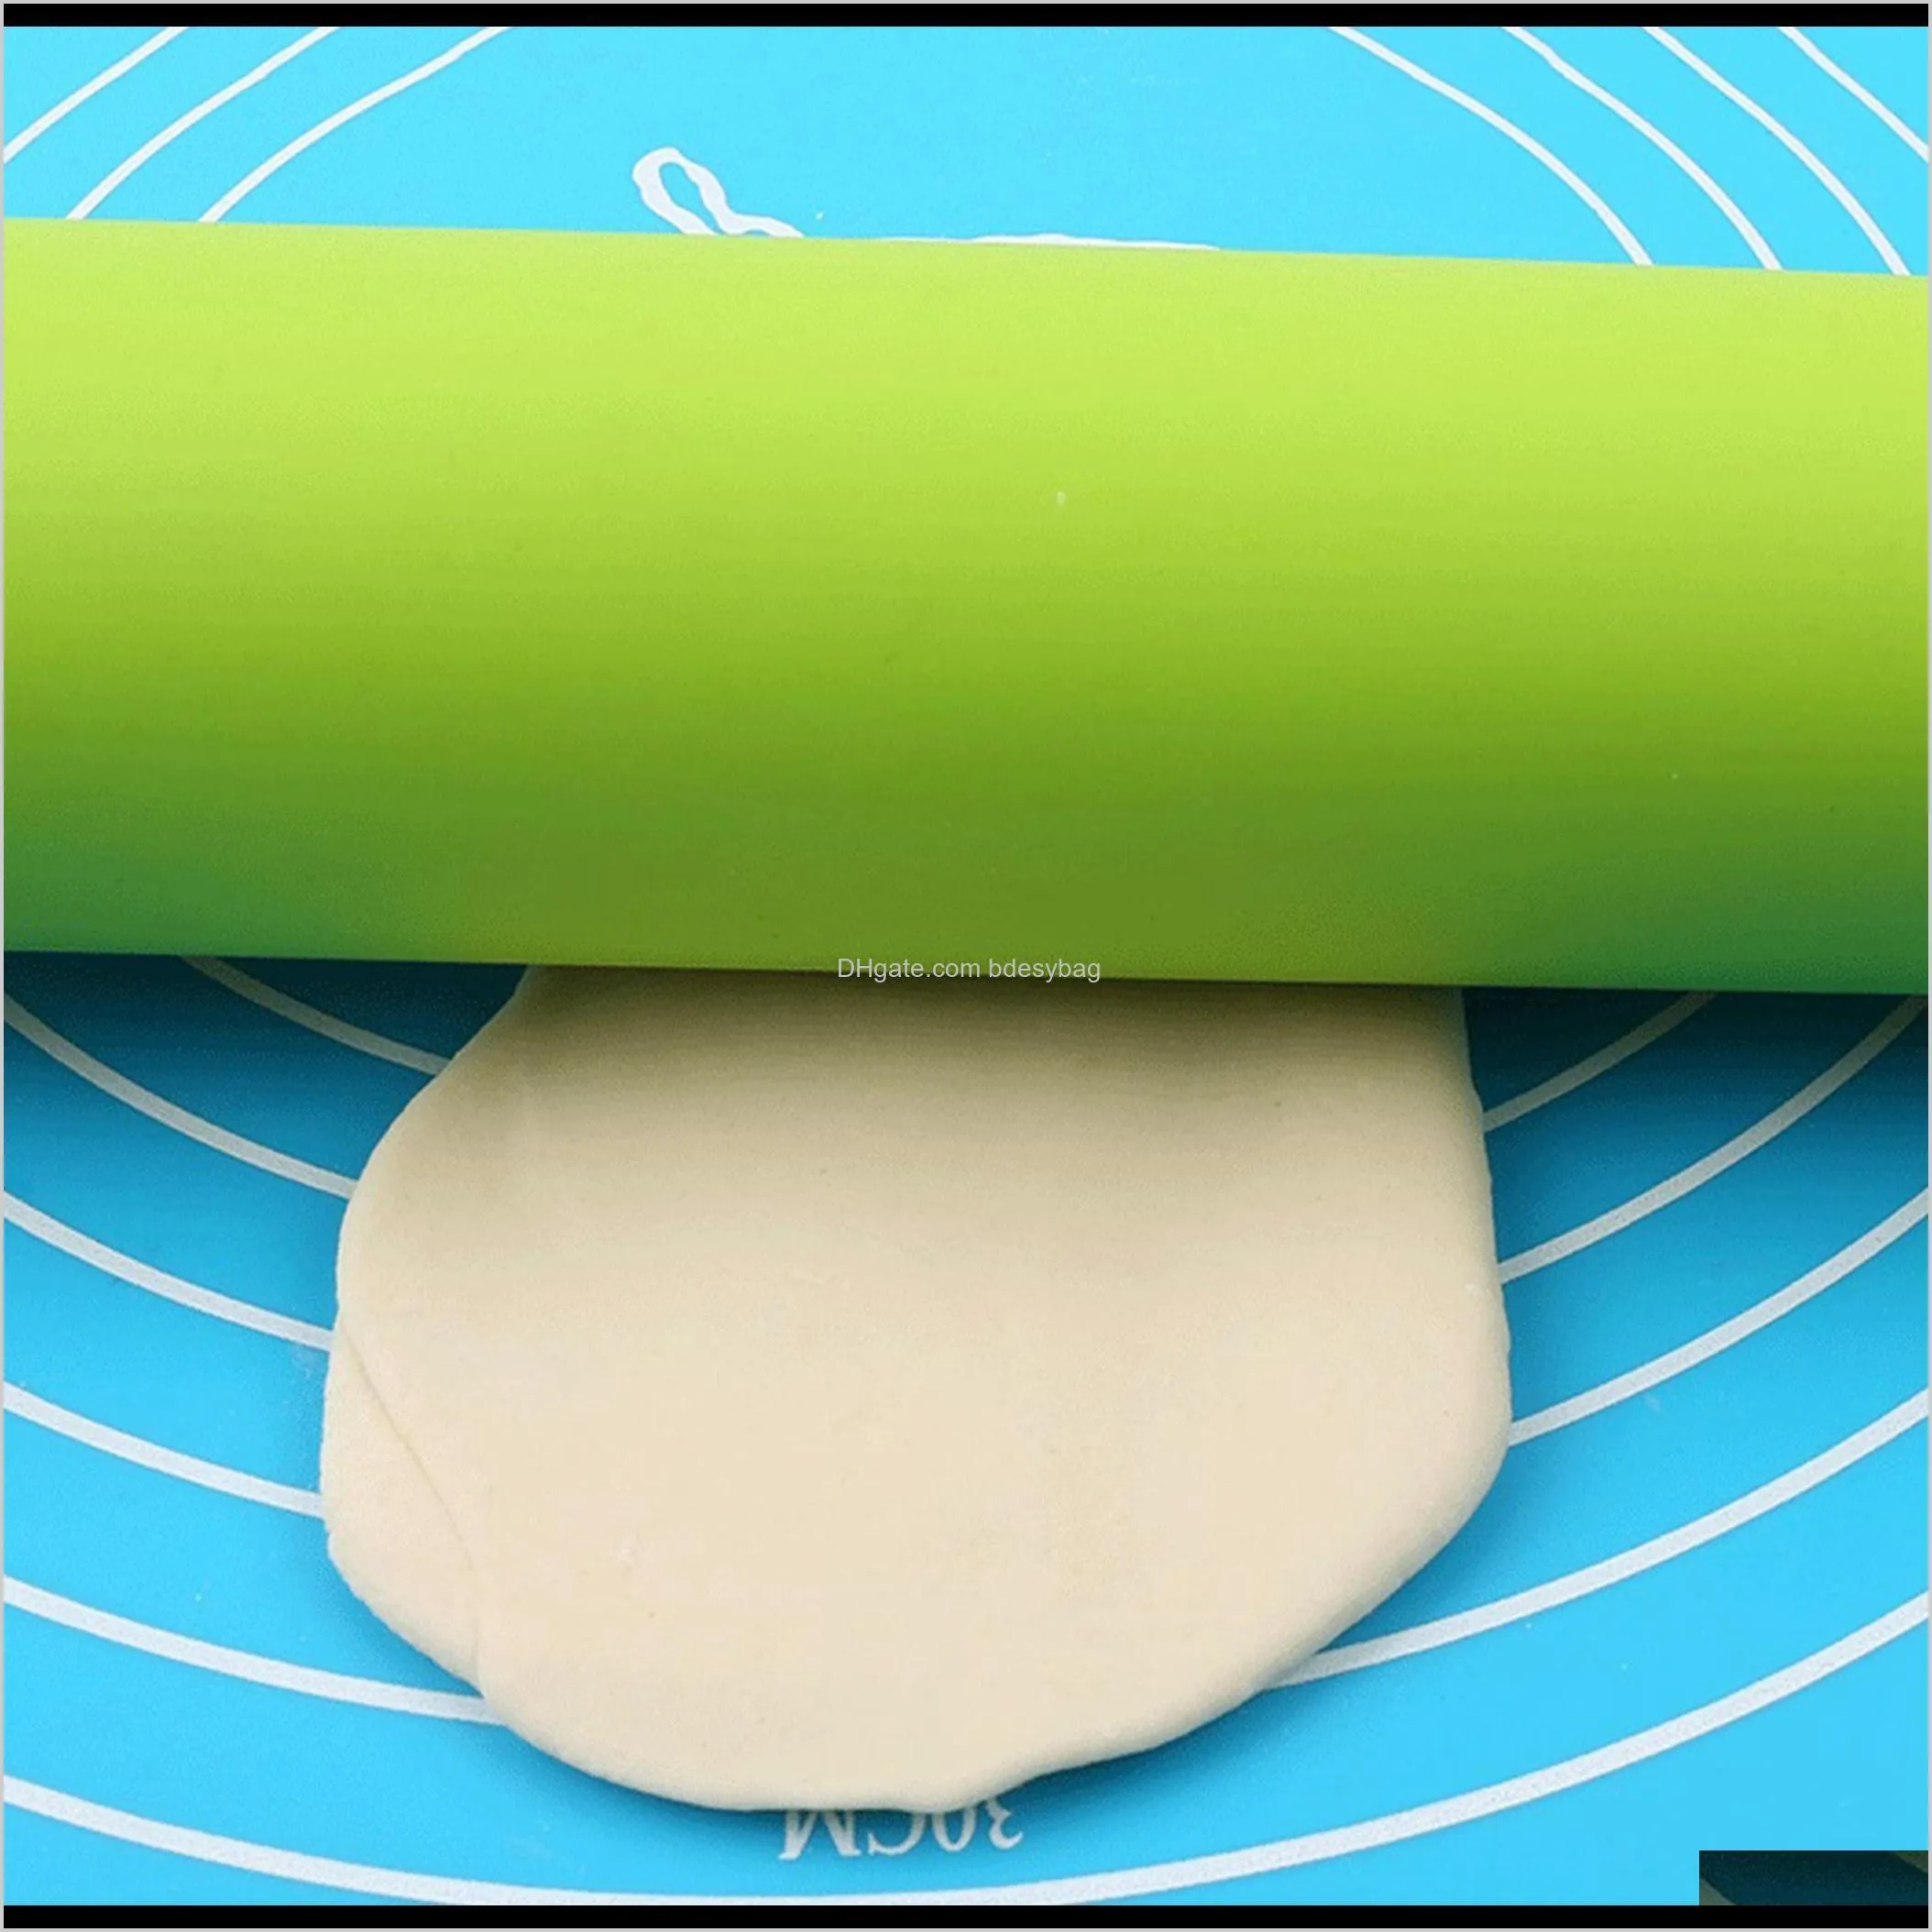 3in1 set silicone dough rolling pin non stick pastry tool plastic handle baking kitchen cookie tool